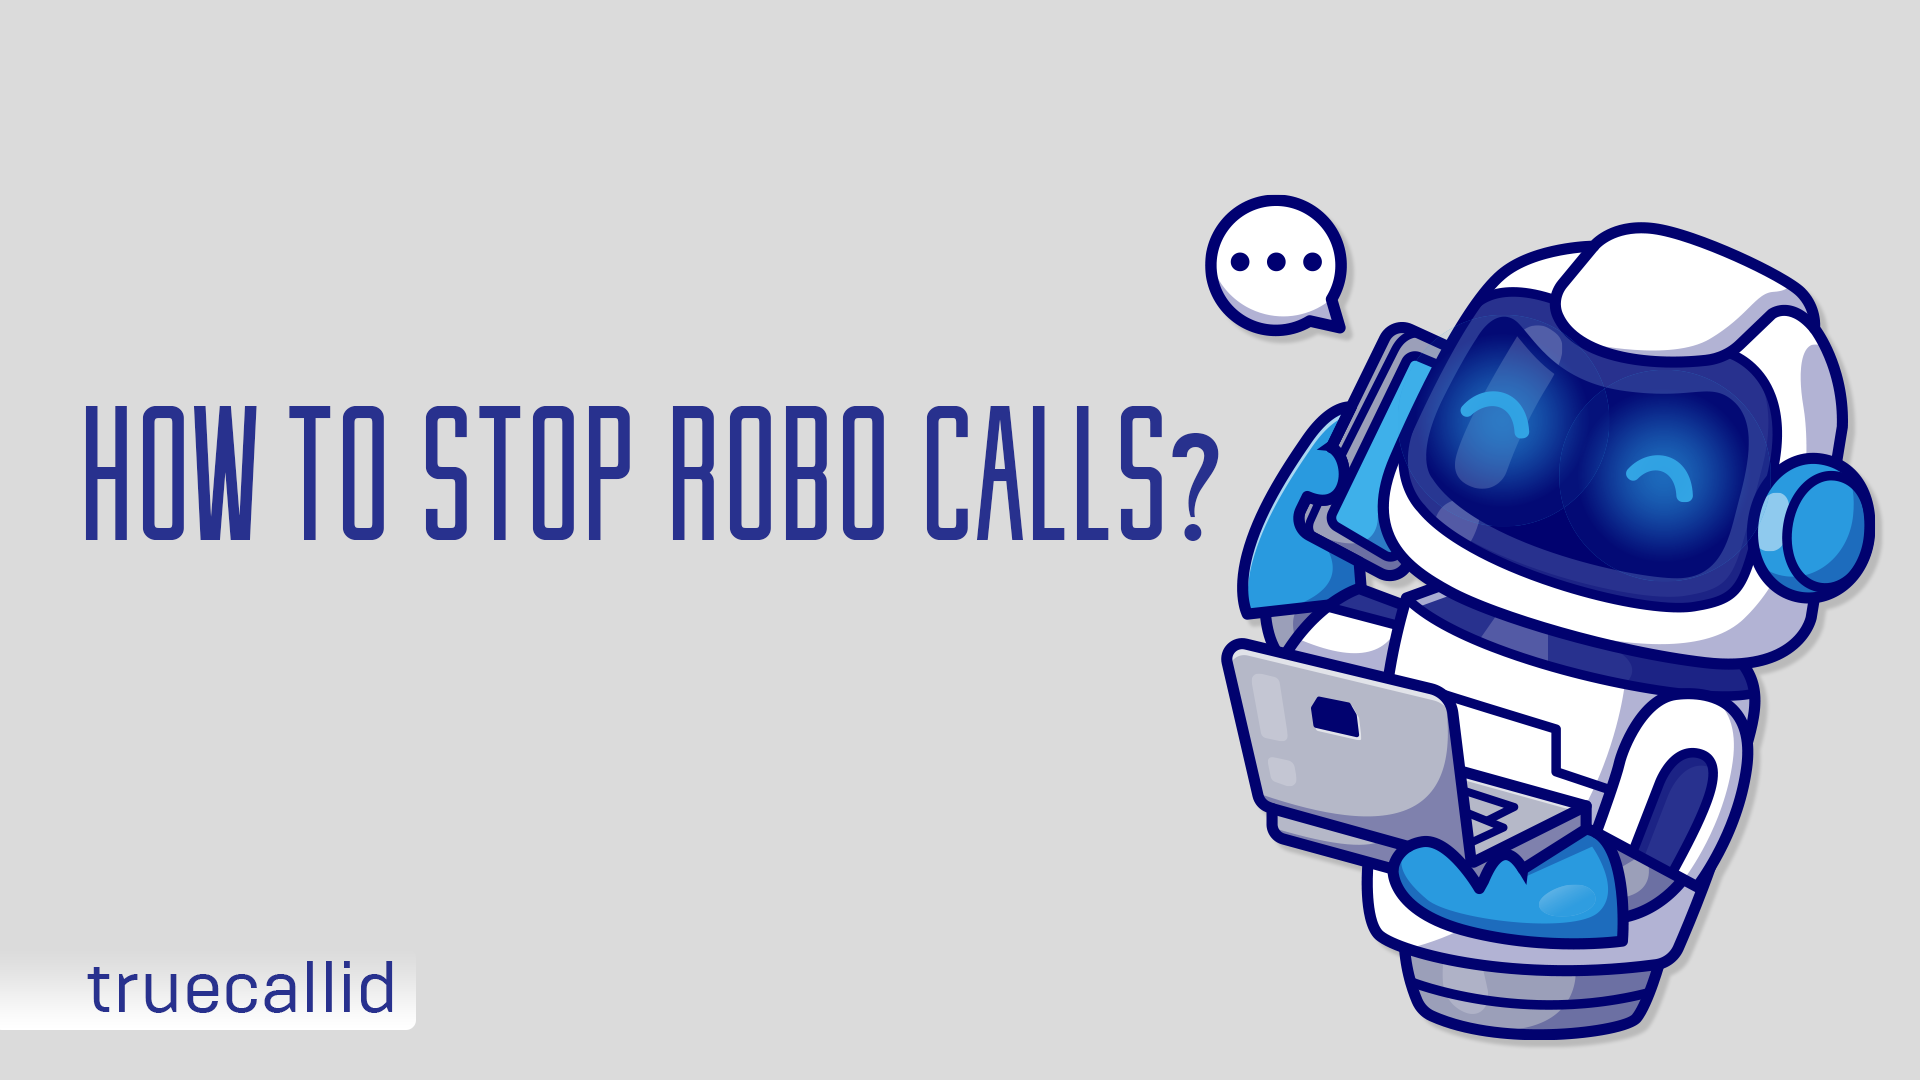 HOW TO STOP ROBO CALLS ON ANDROID FOR FREE?